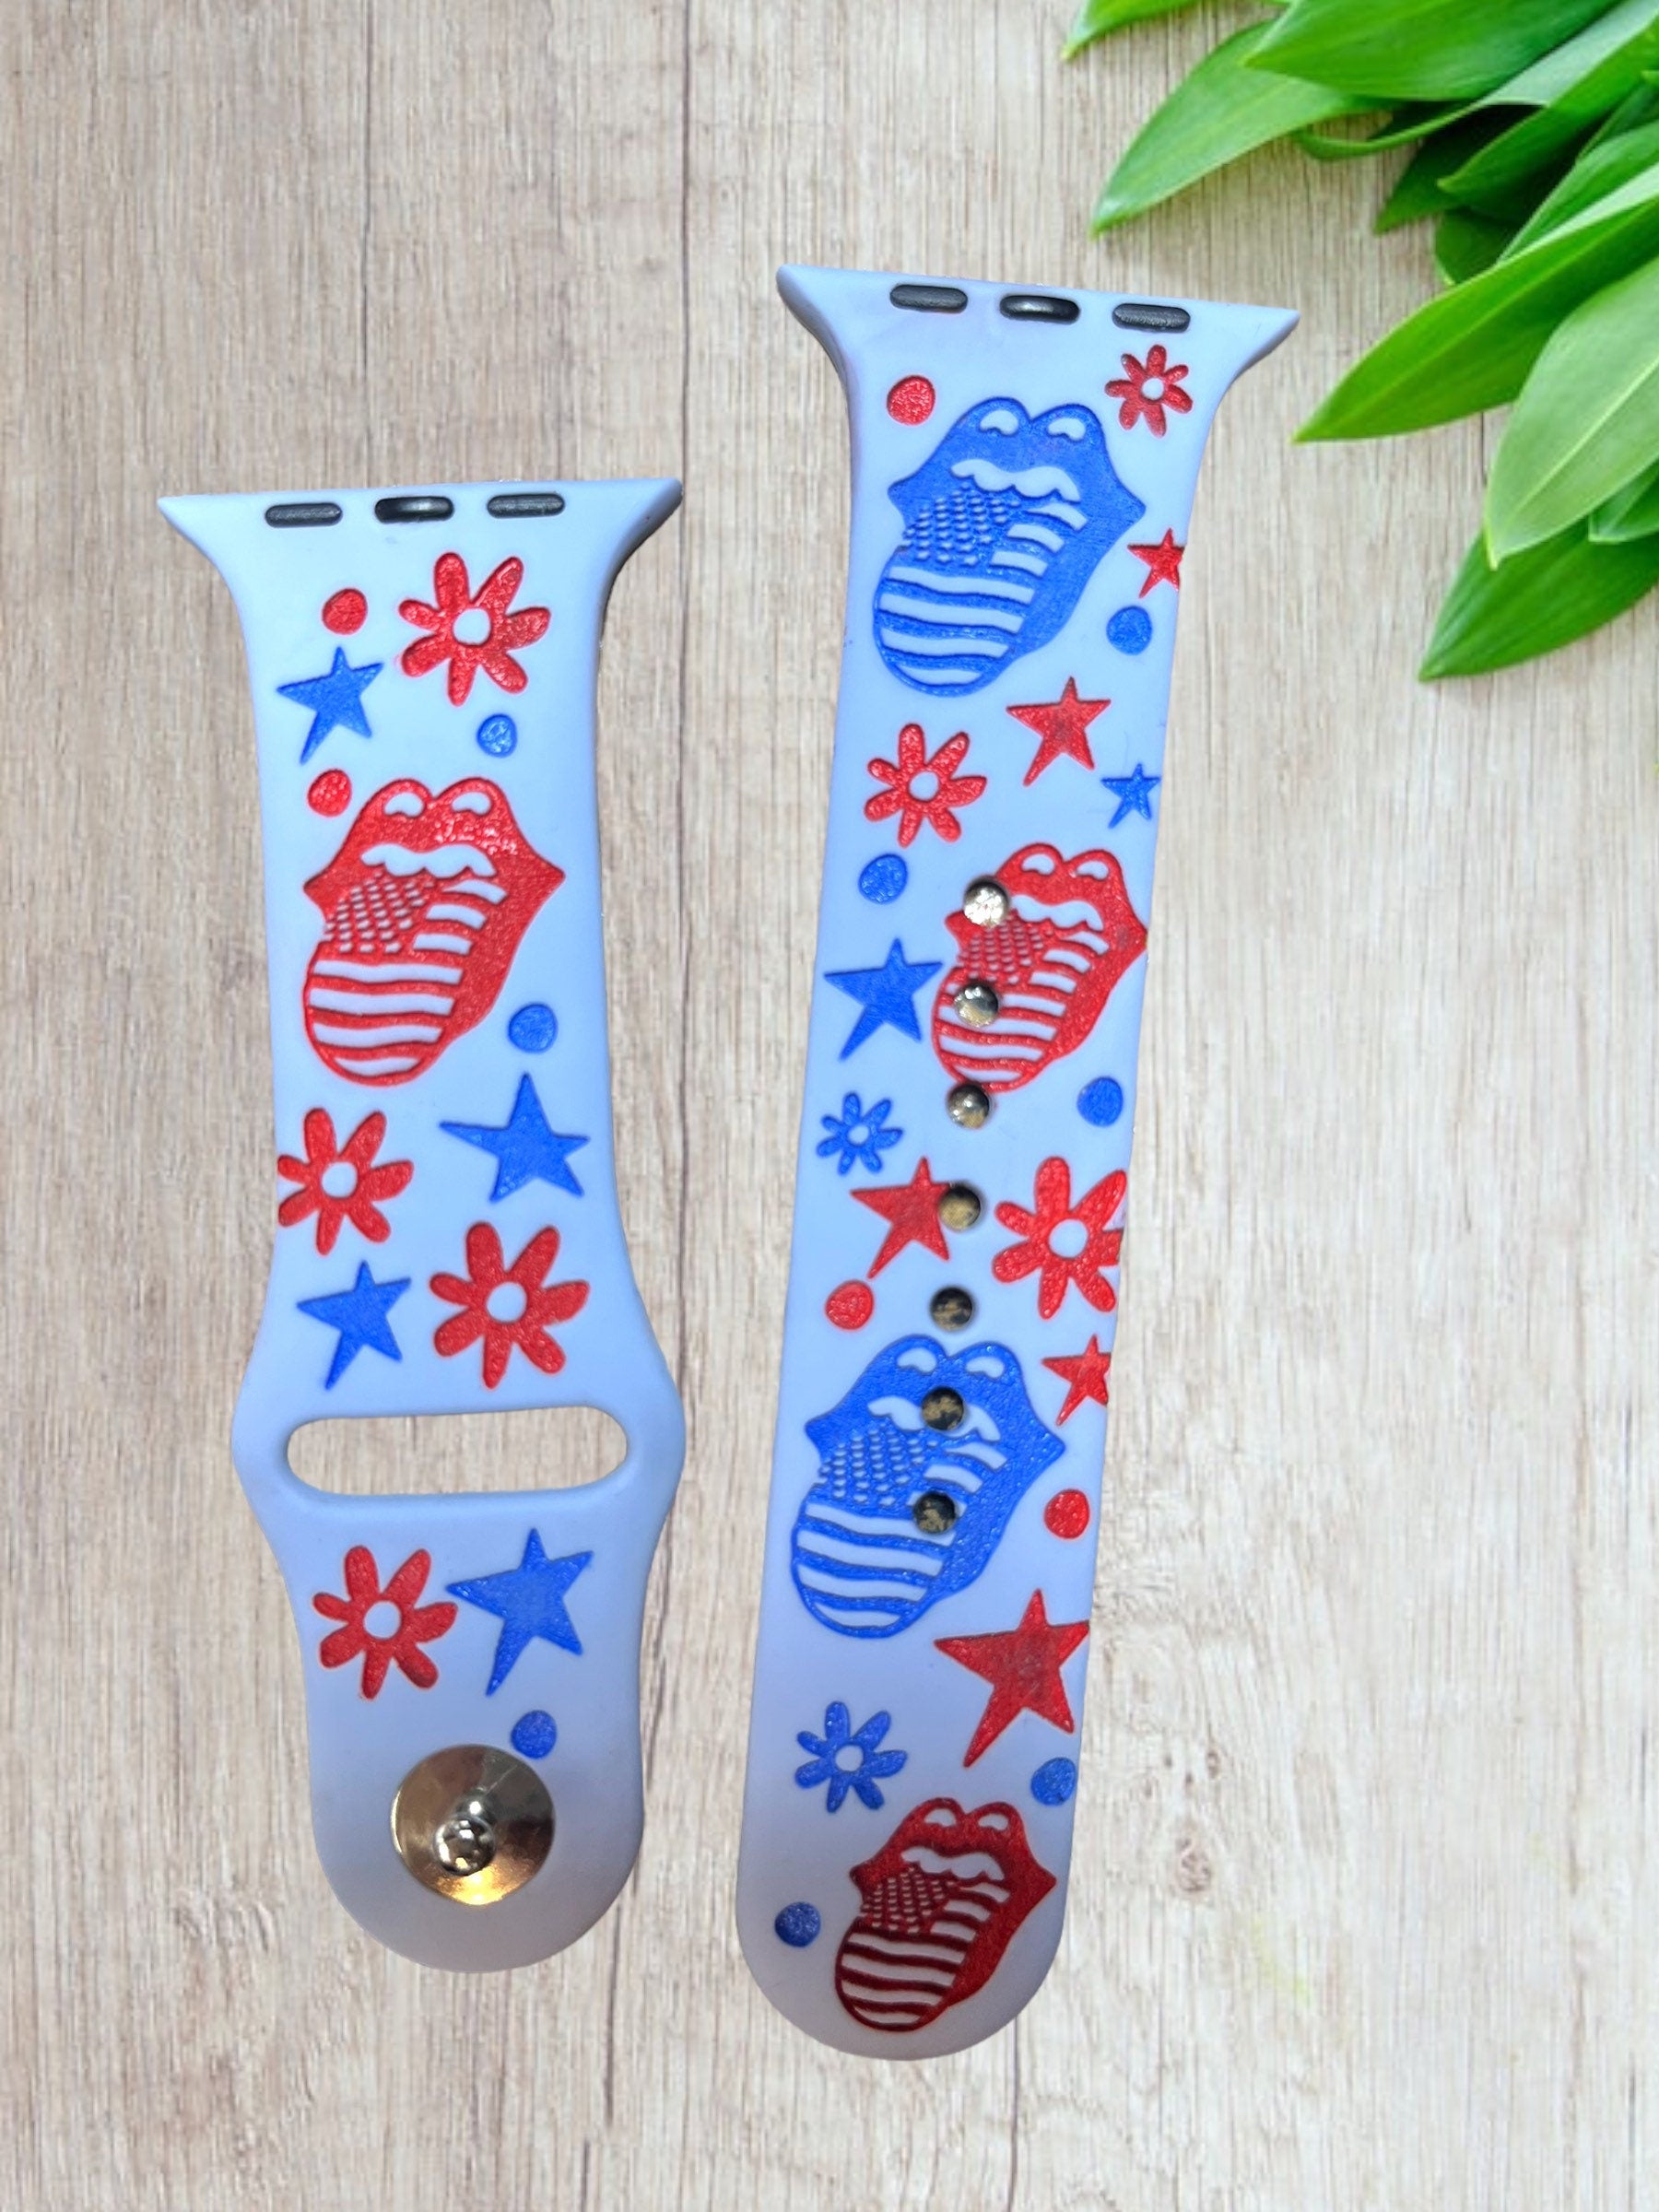 Fourth of July, stars, laser engraved apple compatible watchband,American flag tongue, stars, flowers, Samsung, Fitbit Versa 2, Fitbit sense